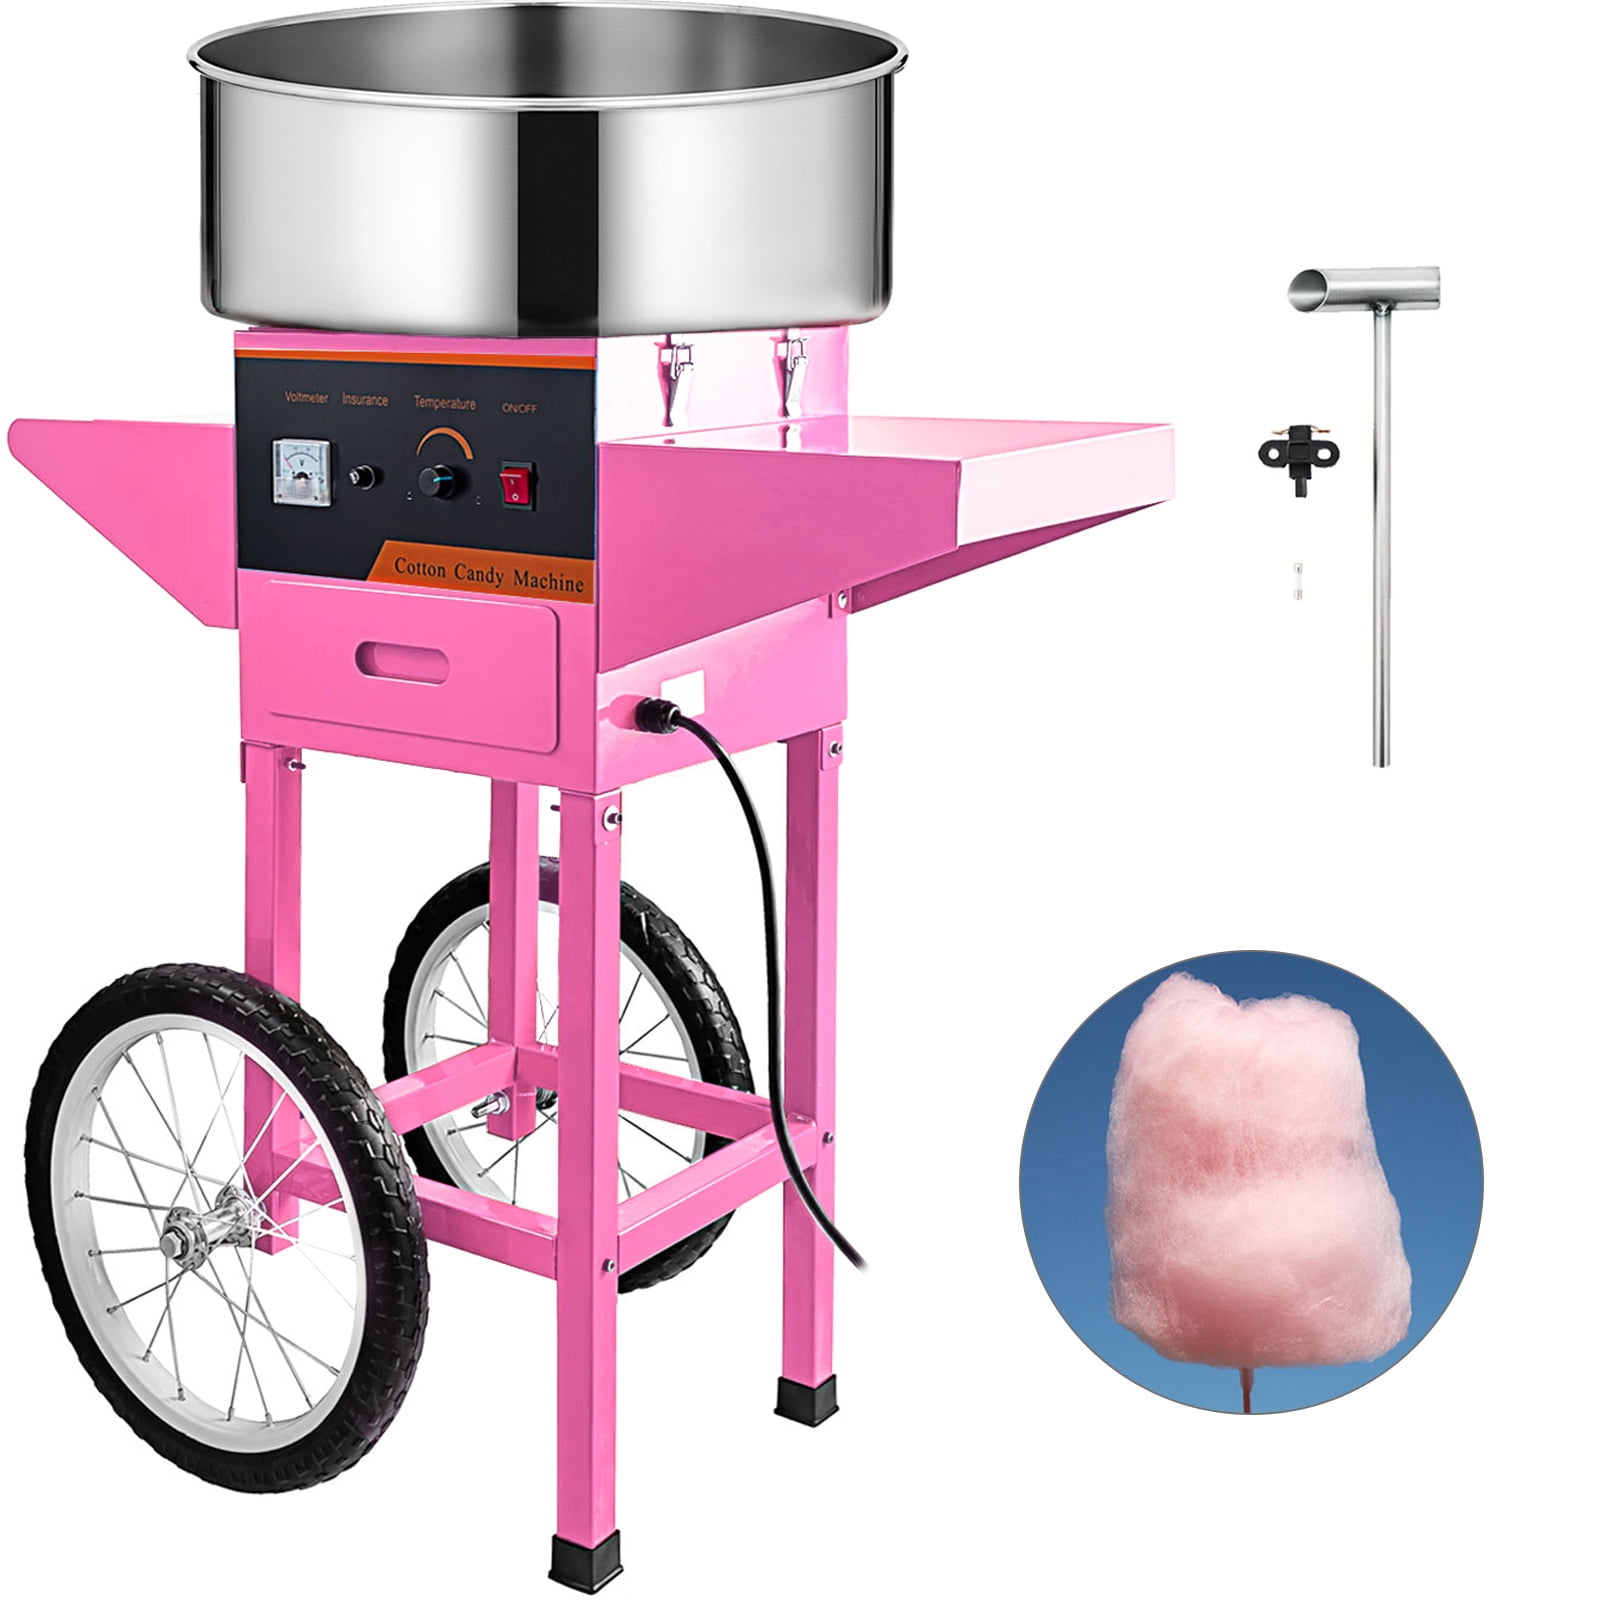 VEVOR Electric Cotton Candy Machine, 1000W Commercial Floss Maker with Stainless Steel Bowl, Sugar Scoop and Drawer, Perfect for Home, Kids Birthday